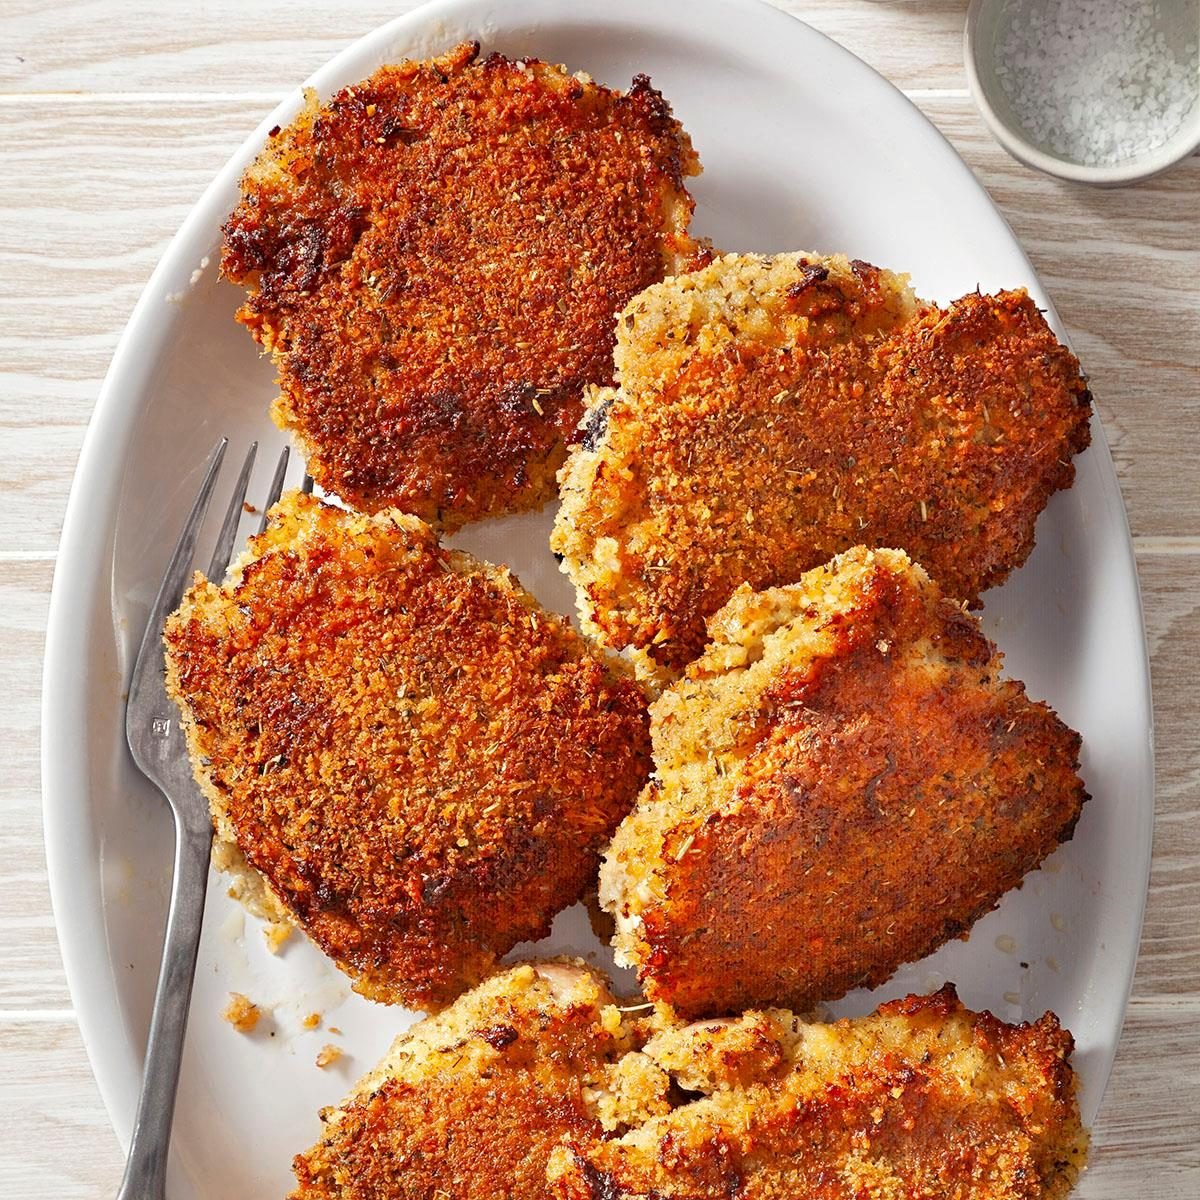 Oven-Fried Chicken Thighs Recipe: How to Make It